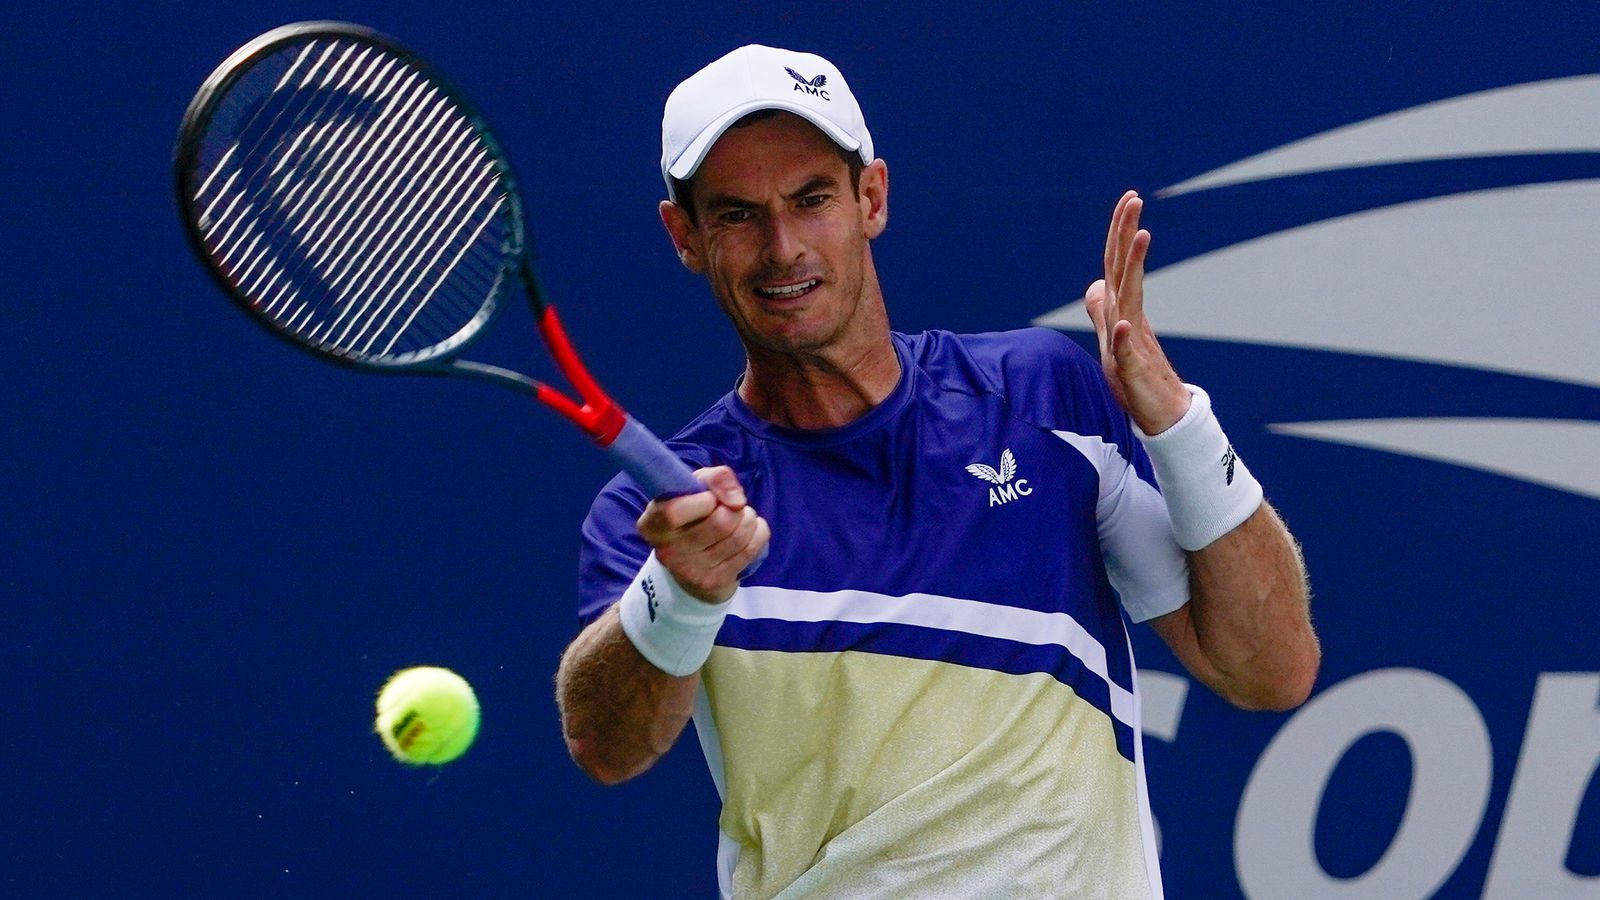 us-open-andy-murray-takes-on-francisco-cerundolo-in-the-opening-round-at-flushing-meadows-in-new-york